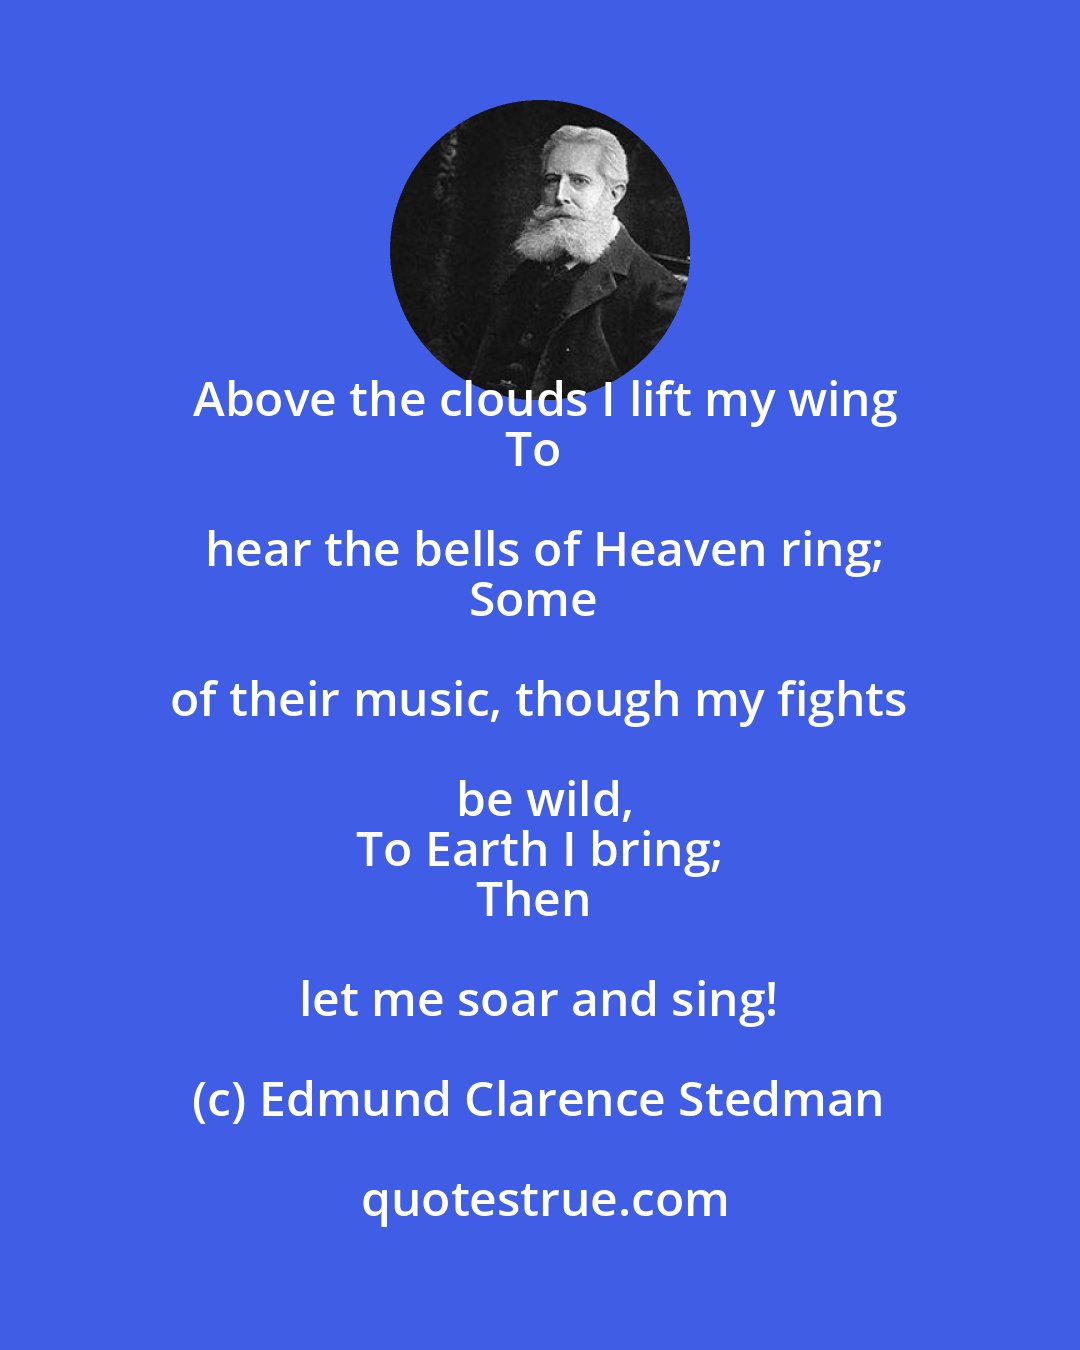 Edmund Clarence Stedman: Above the clouds I lift my wing
To hear the bells of Heaven ring;
Some of their music, though my fights be wild,
To Earth I bring;
Then let me soar and sing!